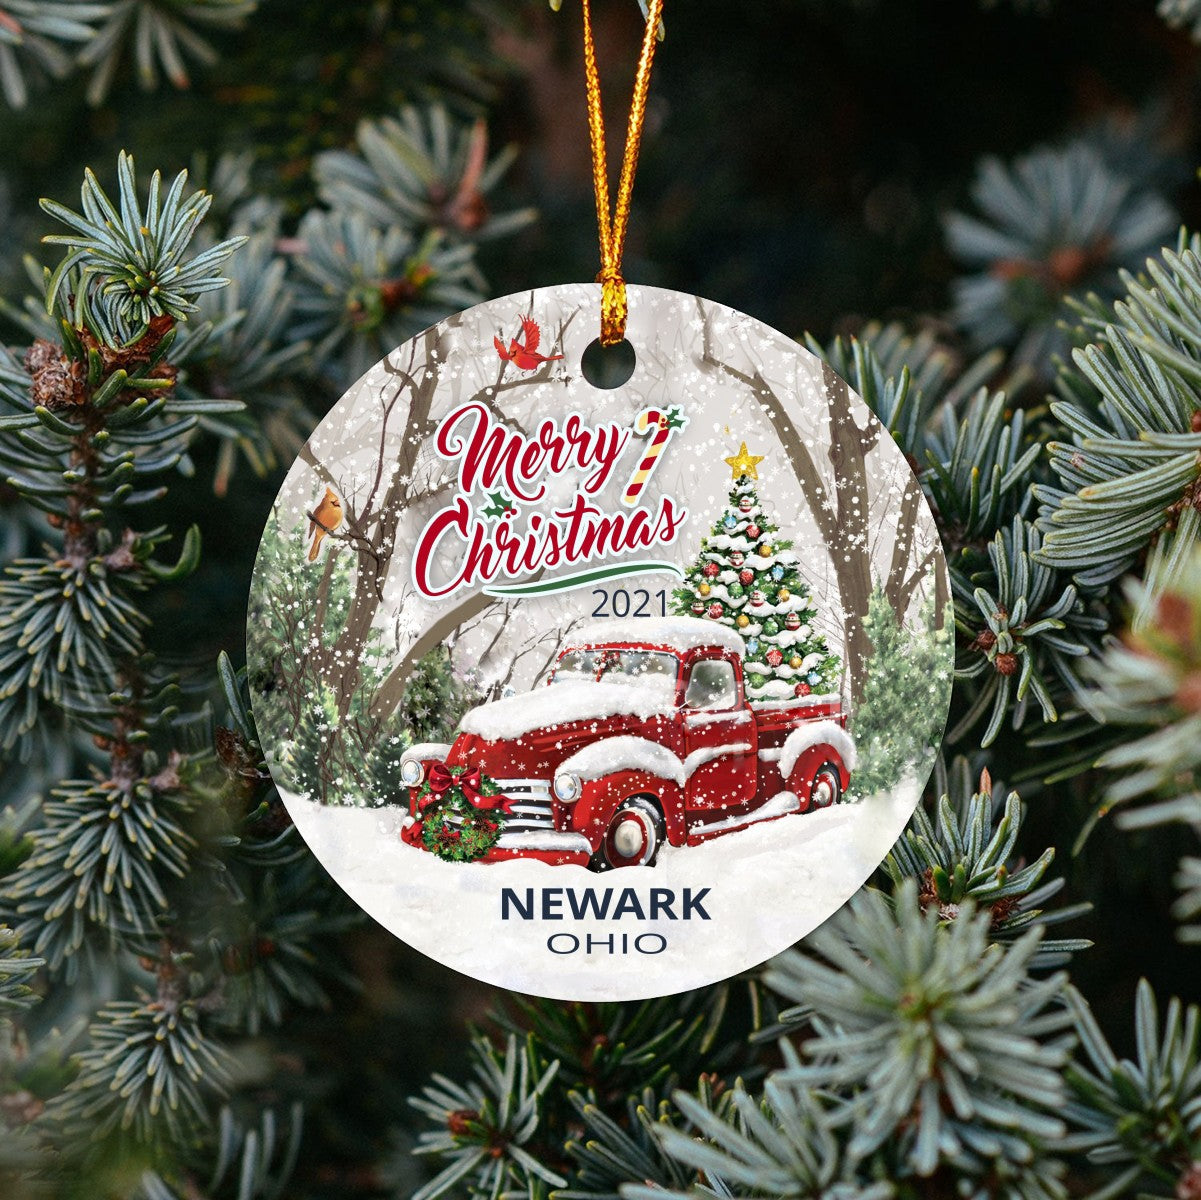 Christmas Tree Ornaments Newark - Ornament Customize With Name City And State Newark Ohio OH - Red Truck Xmas Ornaments 3'' Plastic Gift For Family, Friend And Housewarming